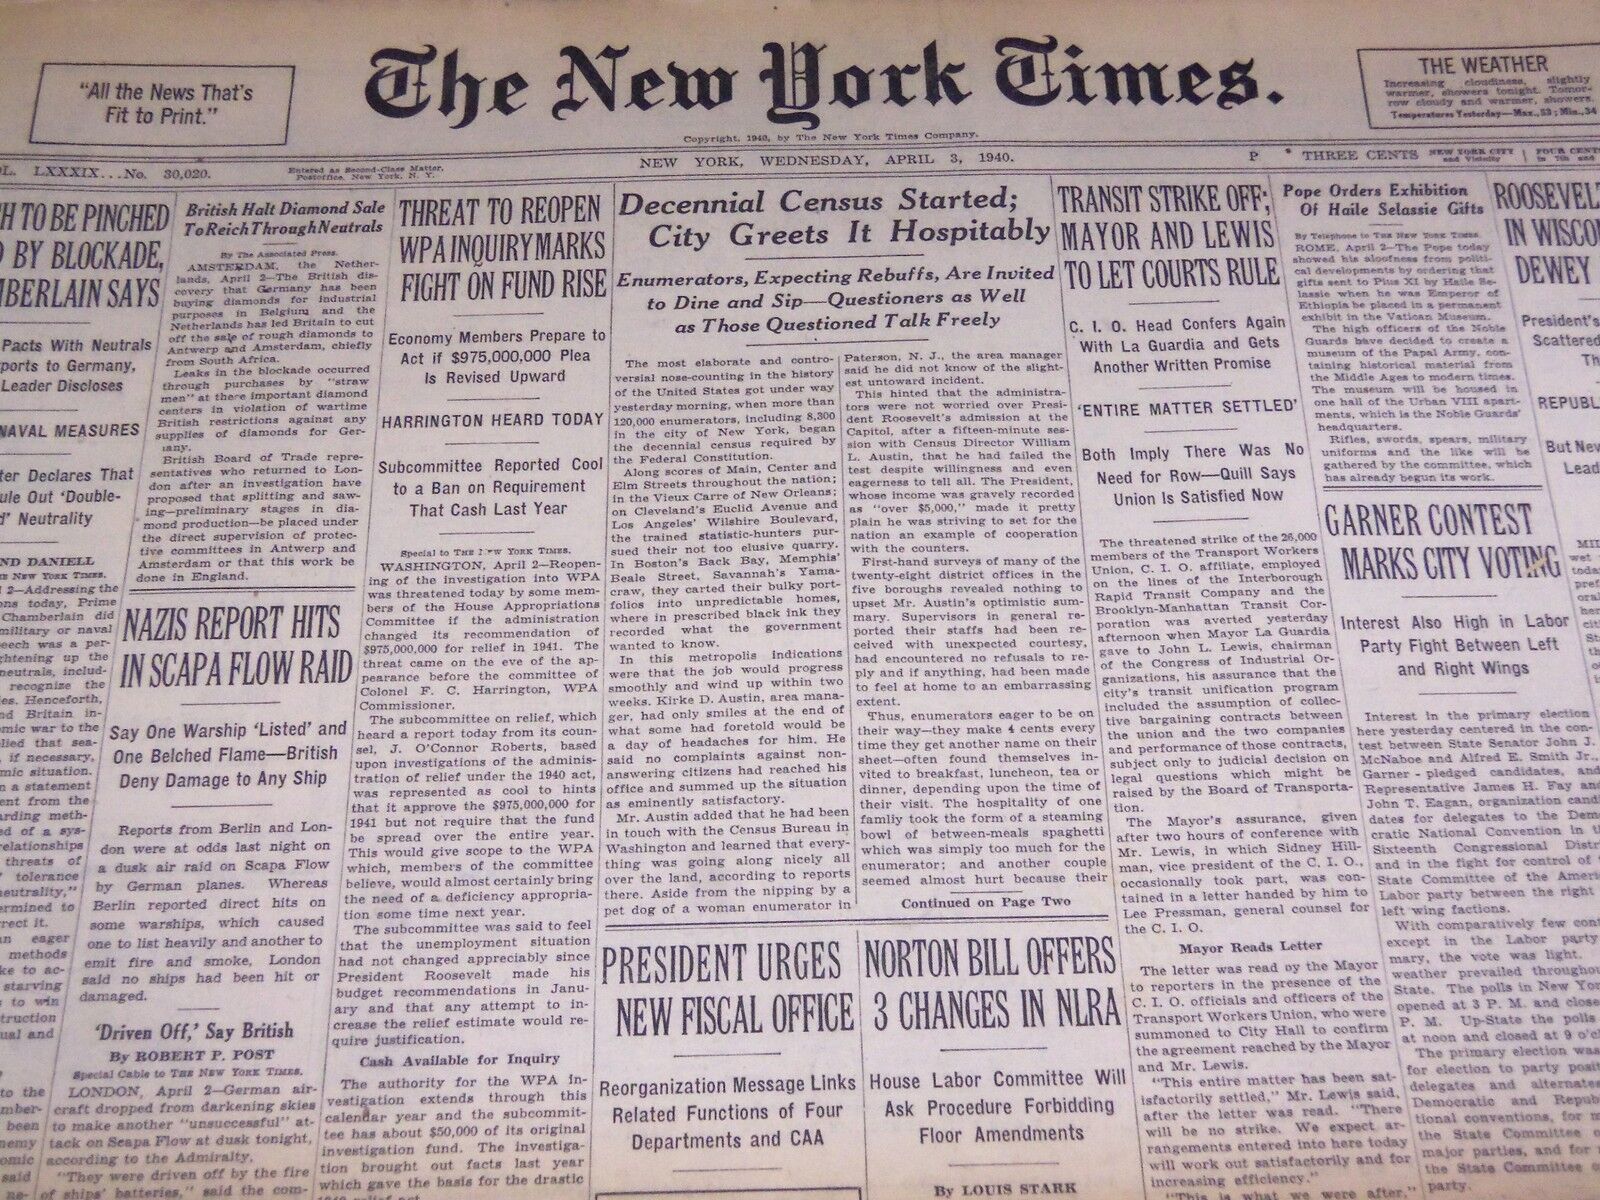 1940 APRIL 3 NEW YORK TIMES - DECENNIAL CENSUS STARTED - NT 2870